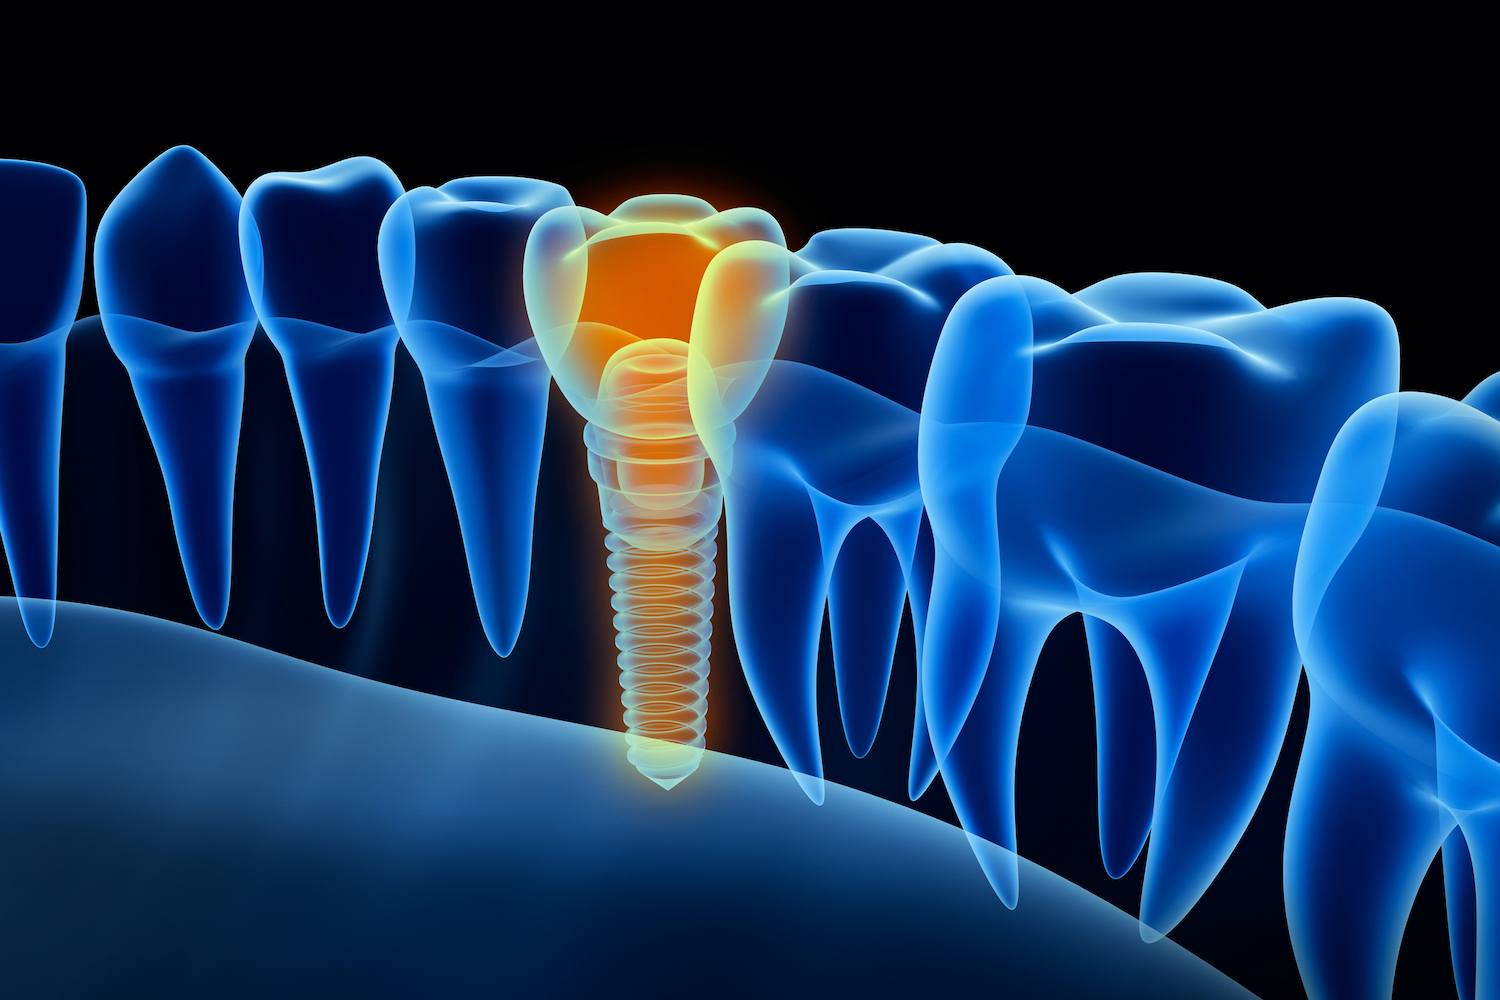 DENTAL IMPLANTS in BROOMALL PA may not be available for every patient